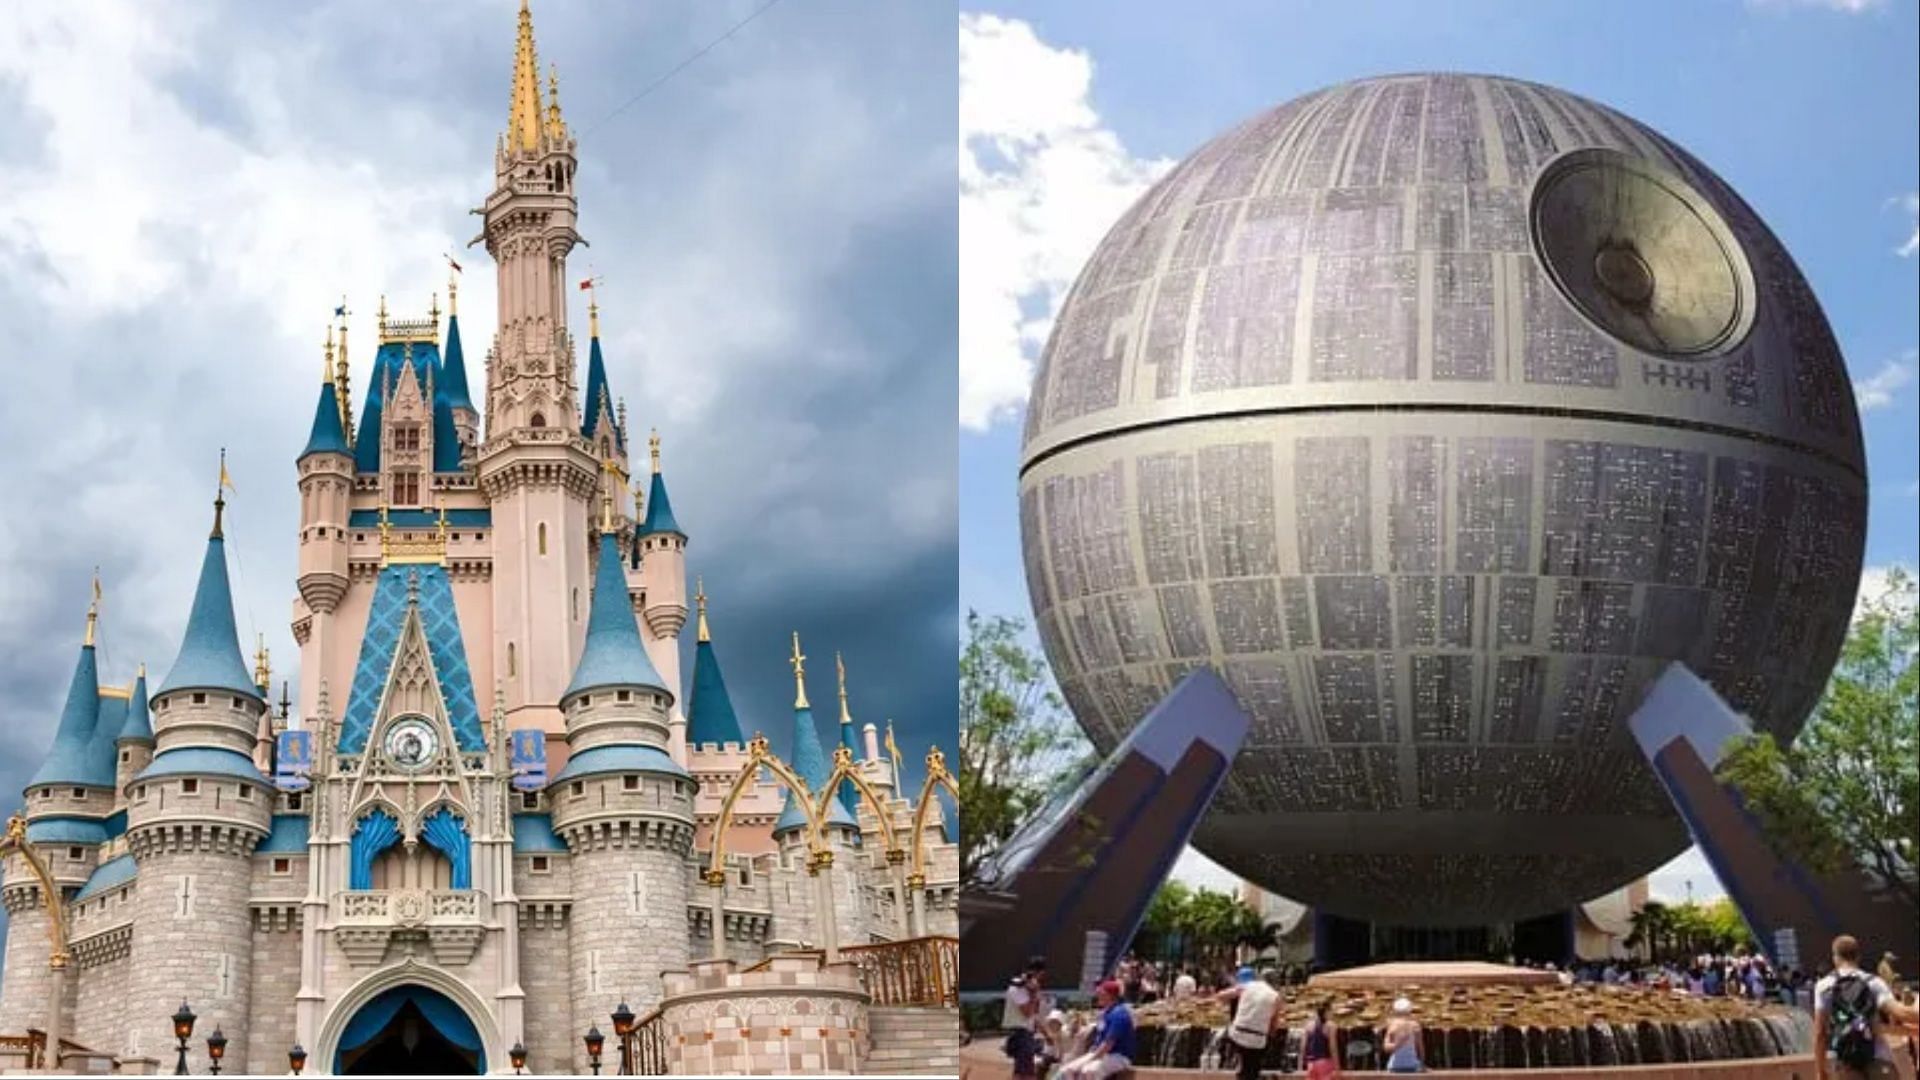 Viral claim of Star Wars themed park in Disney World is debunked. (Image via Getty Images, Adam McCabe)